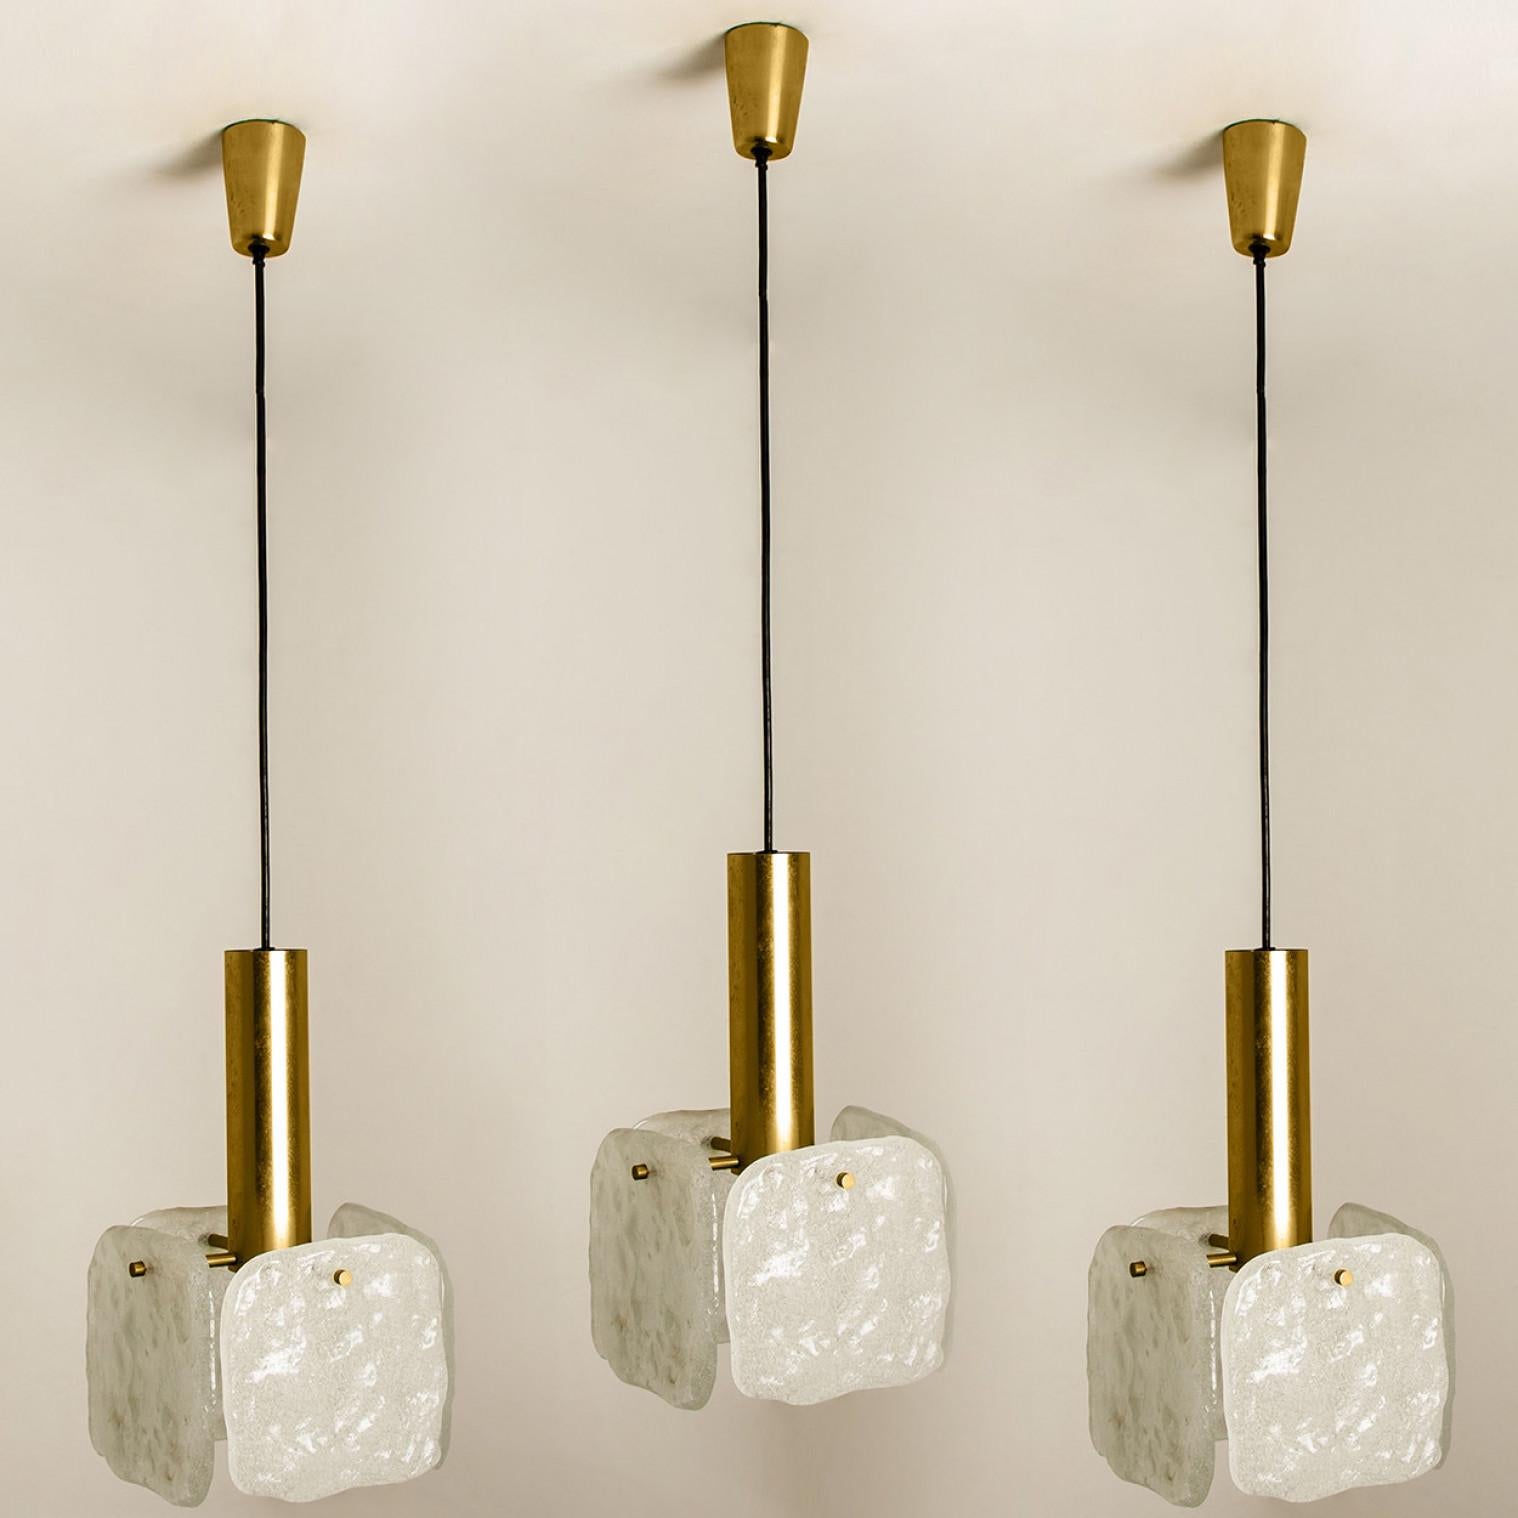 One of the three ice glass pendant lights designed by J.T Kalmar, manufactured by Kalmar Franken, Austria in the 1960s.
Stunning design, each pendant has four large squares of white, opaque textured glass (each approximately 17cm x 17m) provides a